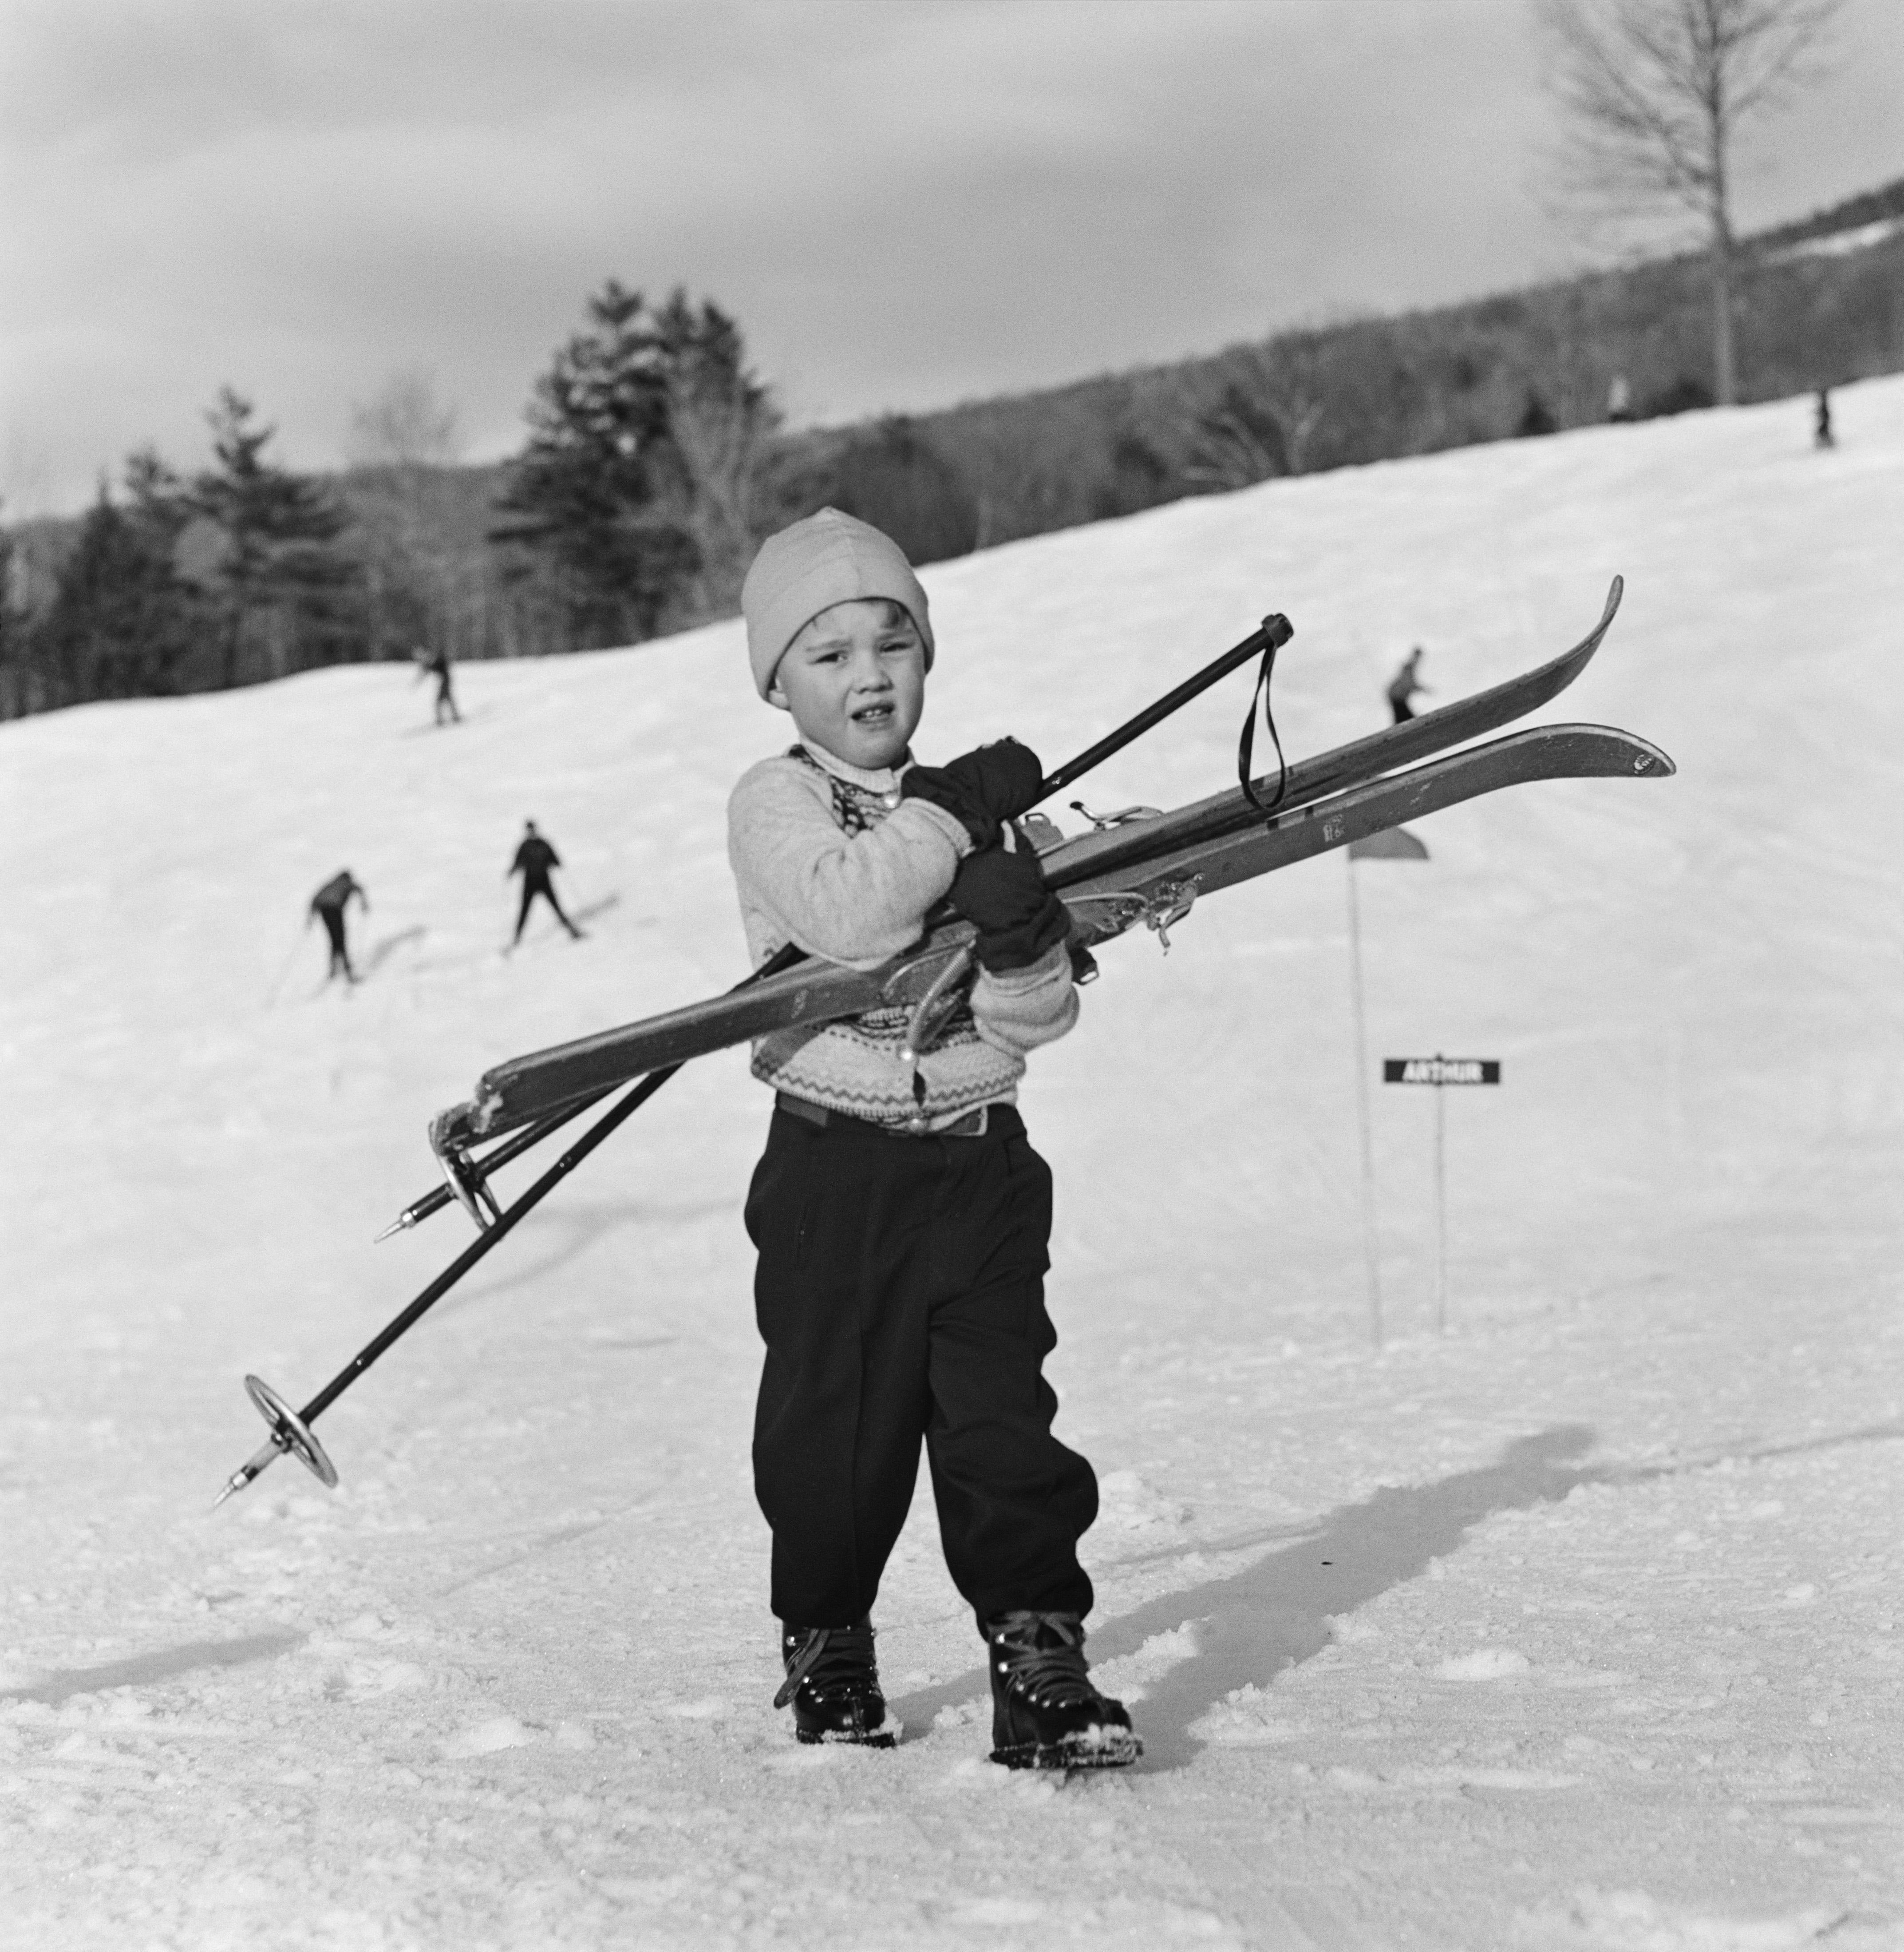 New England Skiing - 'Skiing Starters' (1955) - Limited Edition Estate Stamped - Silver Gelatin Fibre Print

(Photo By Slim Aarons/Getty Images Archive) 

A young skier prefers to carry his skis down the slope in New Hampshire, 1955.

Additional